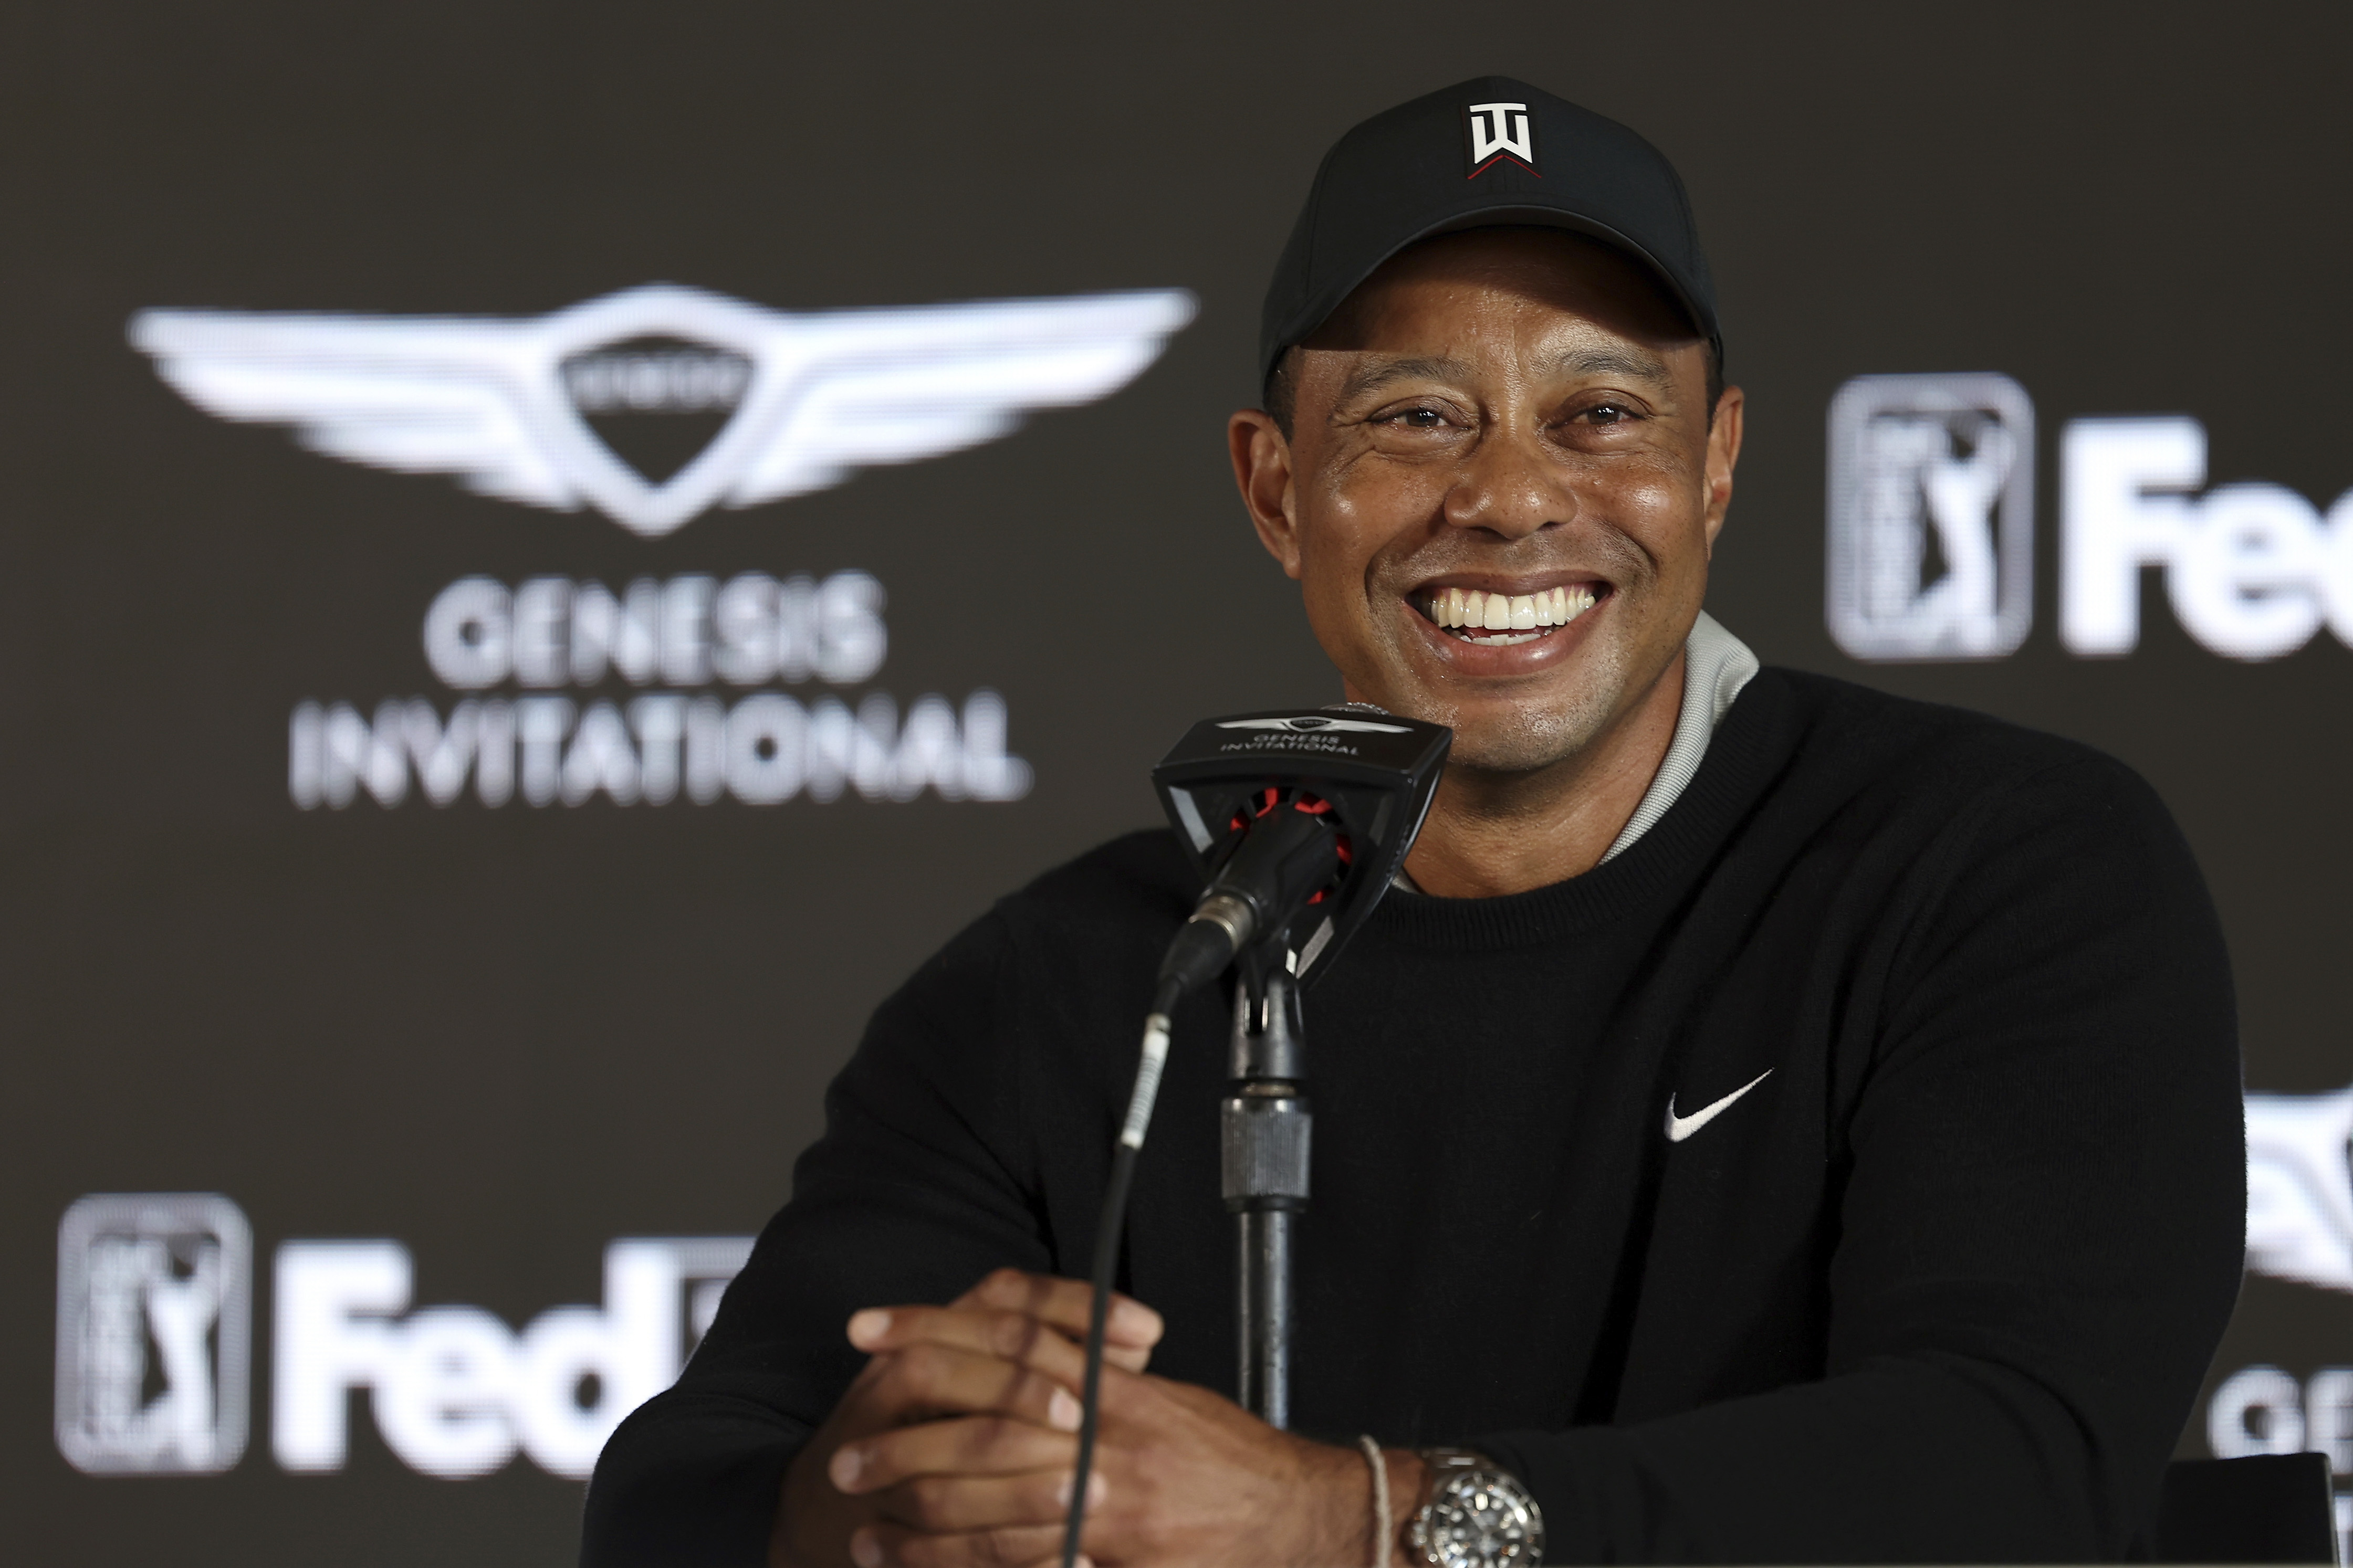 live stream tiger woods today